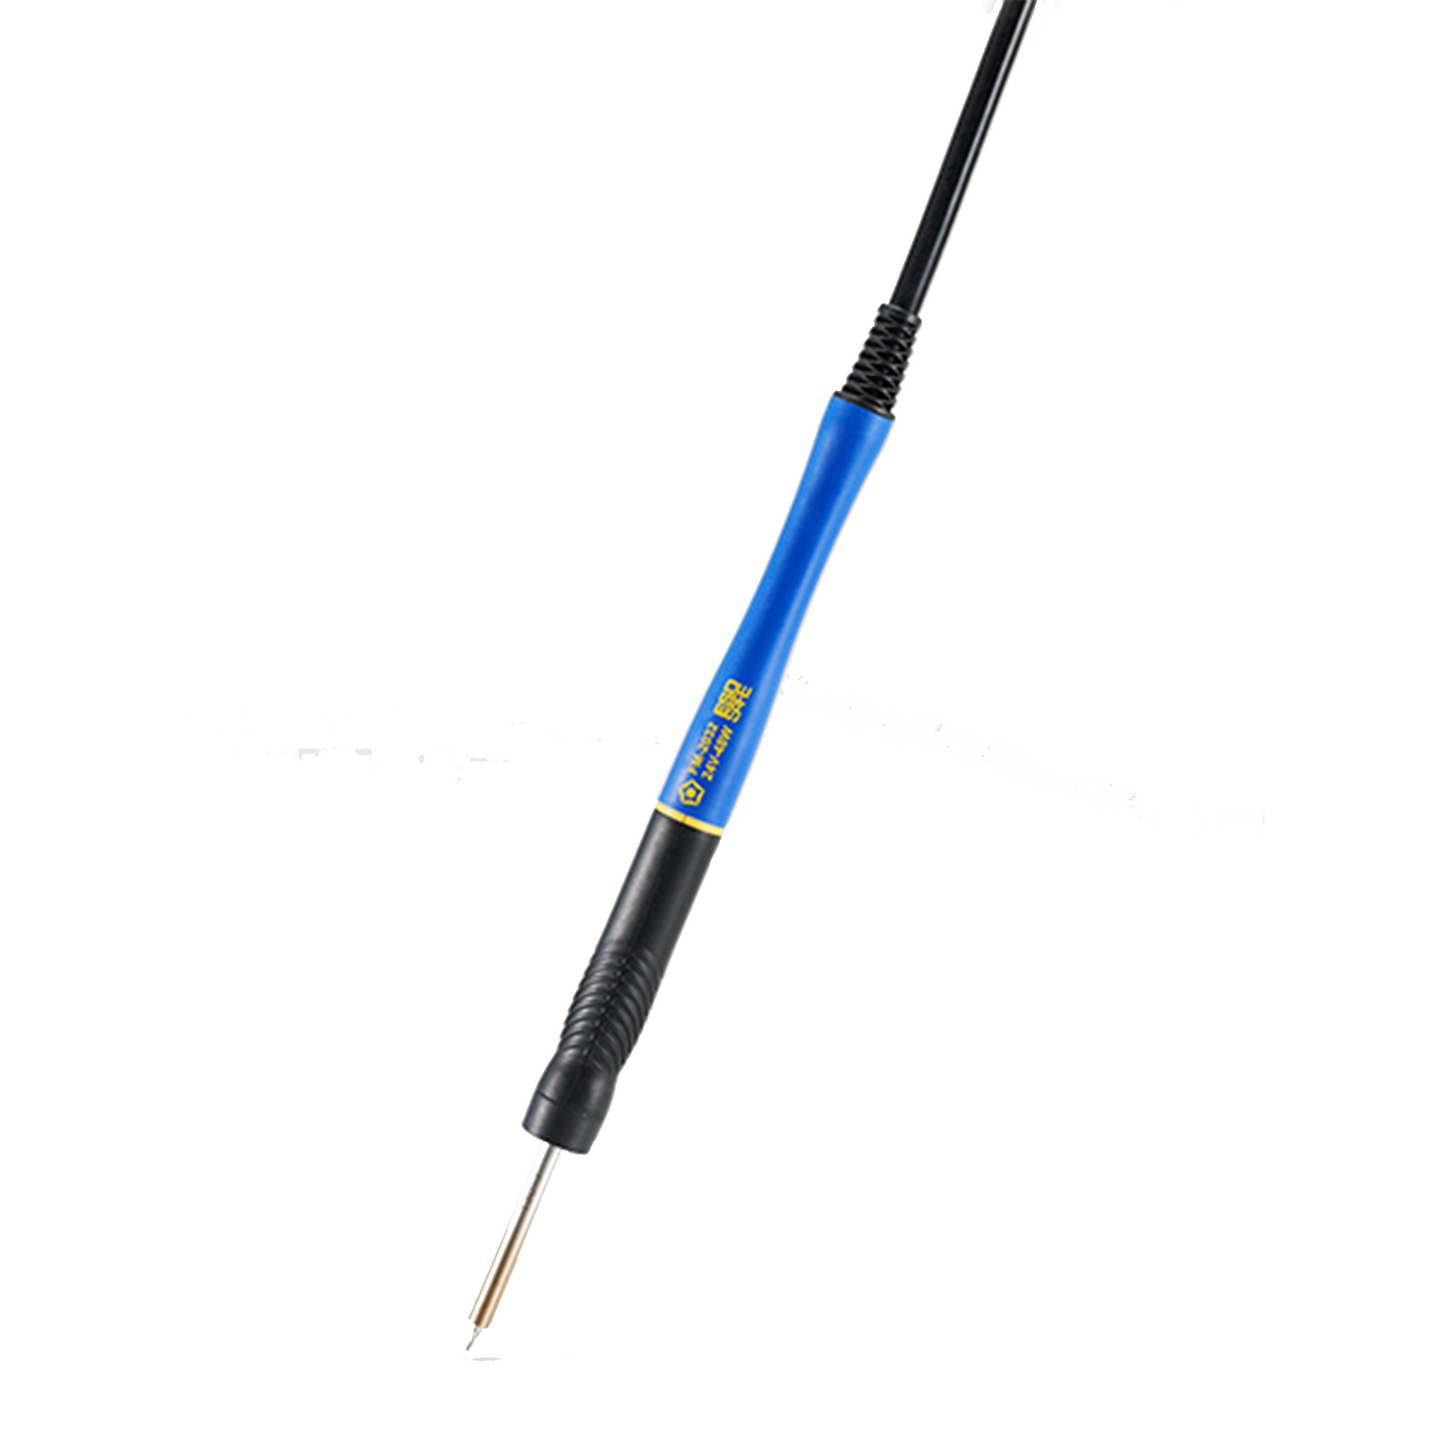 Hakko FM2032 48W micro soldering iron with N2 soldering option available. Compatible with FX951, FX952 soldering station, FM203 2-in-1 rework station, FM206 3-in-1 rework station